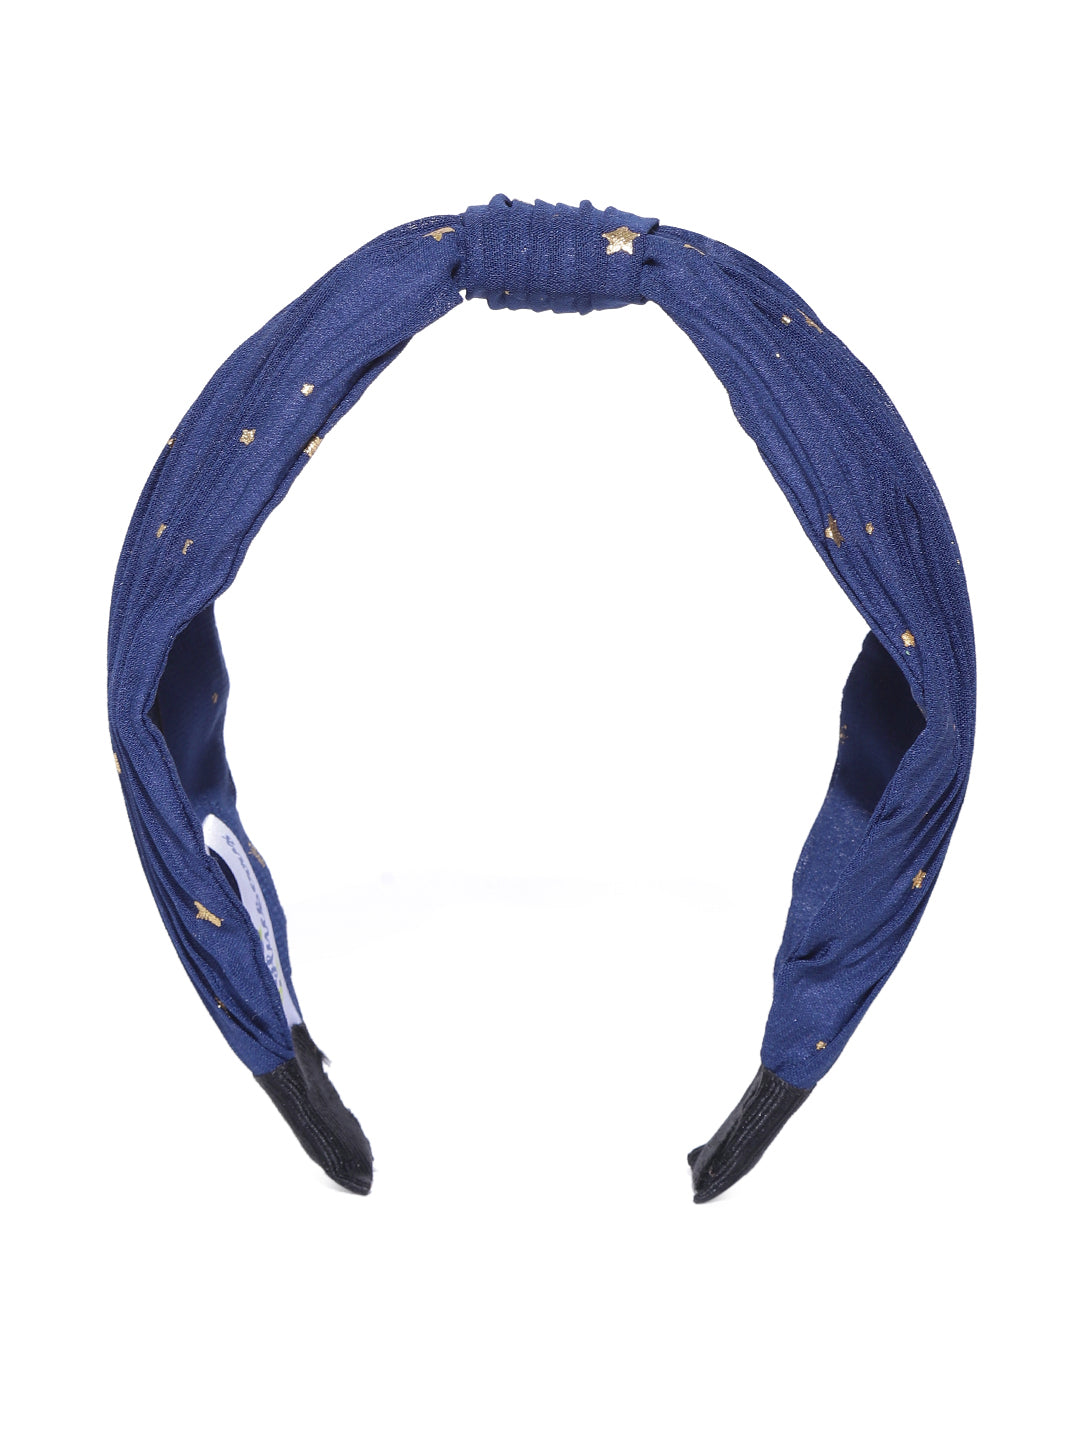 Blueberry golden star printed blue hair band